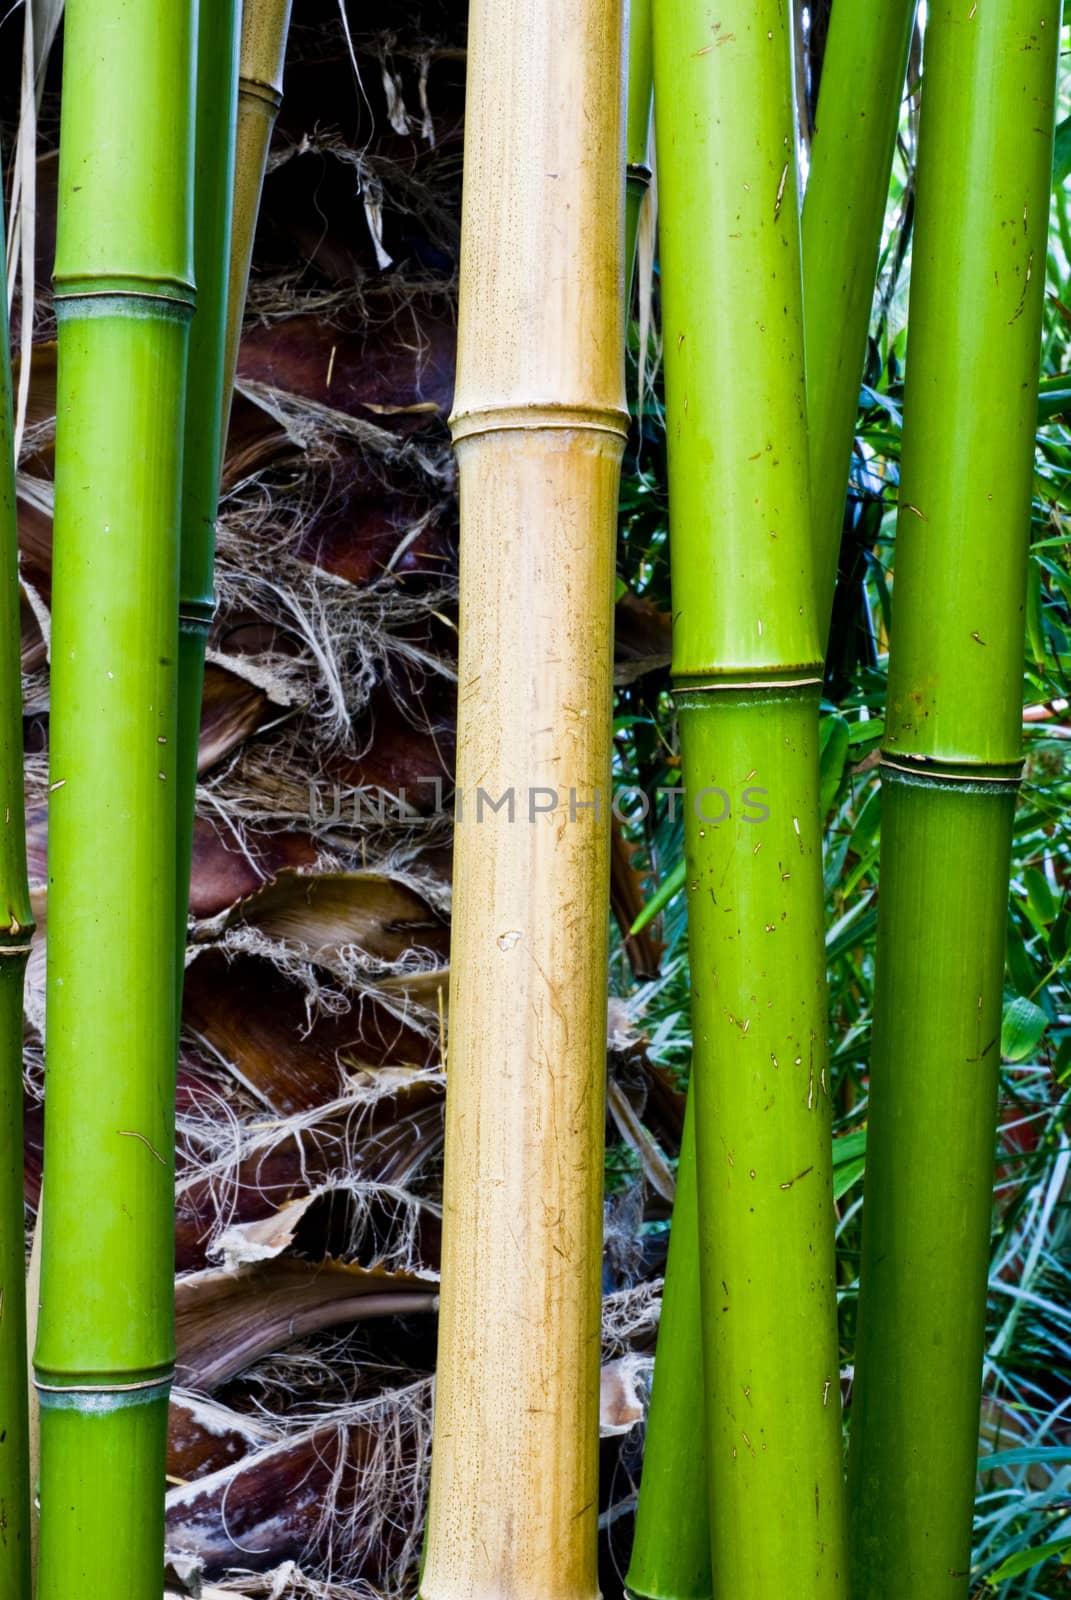 Tropical green bamboo in japanese jungle